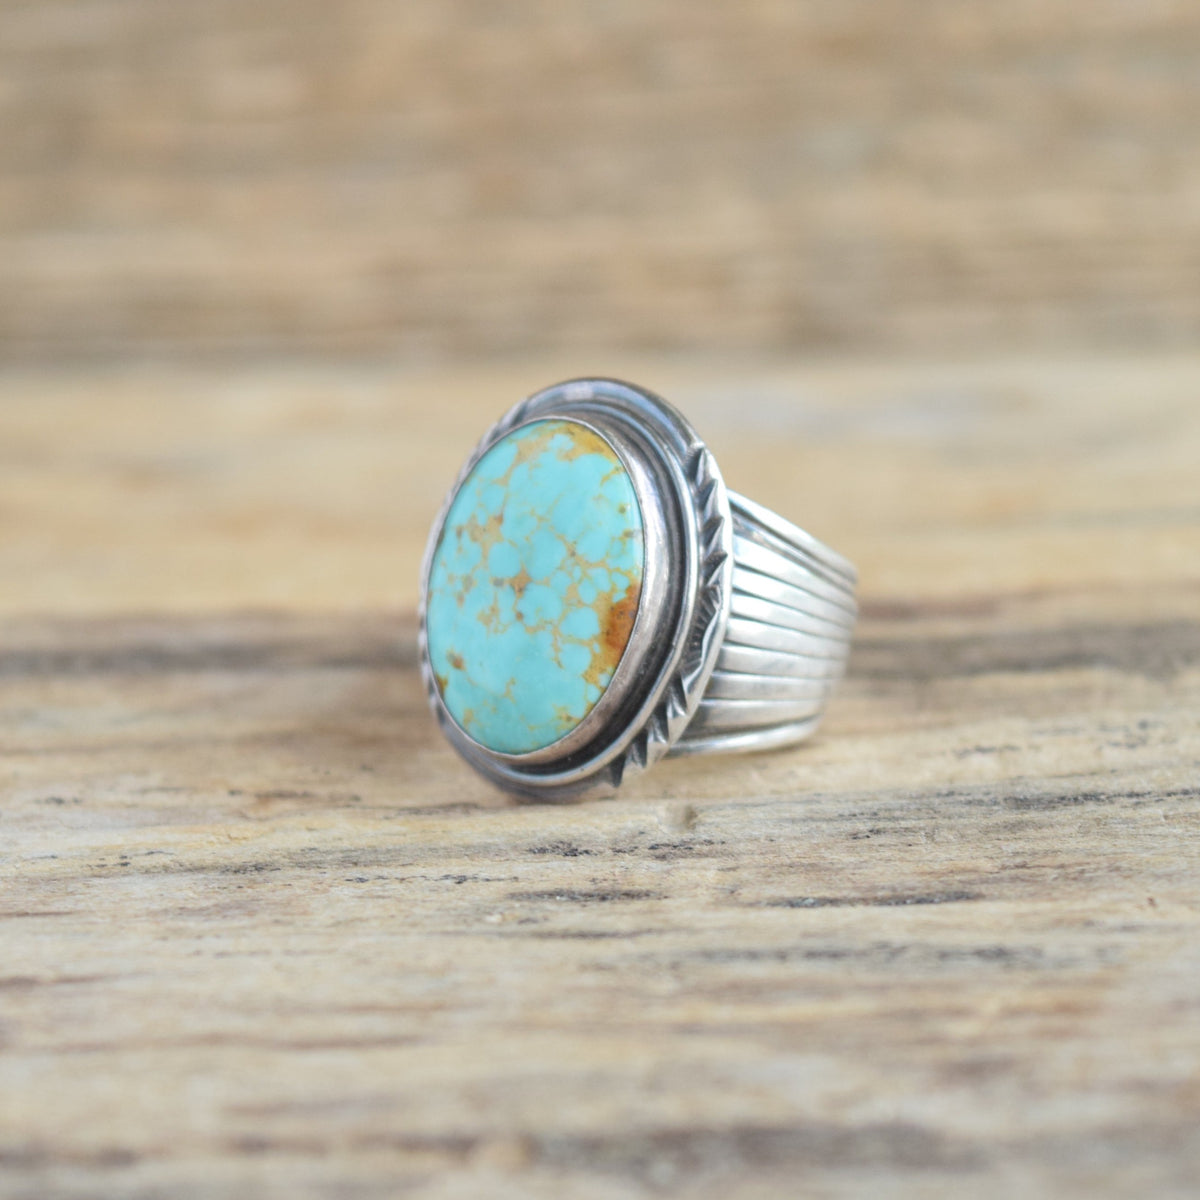 Will Denetdale - Navajo Turquoise Ring - Size 9